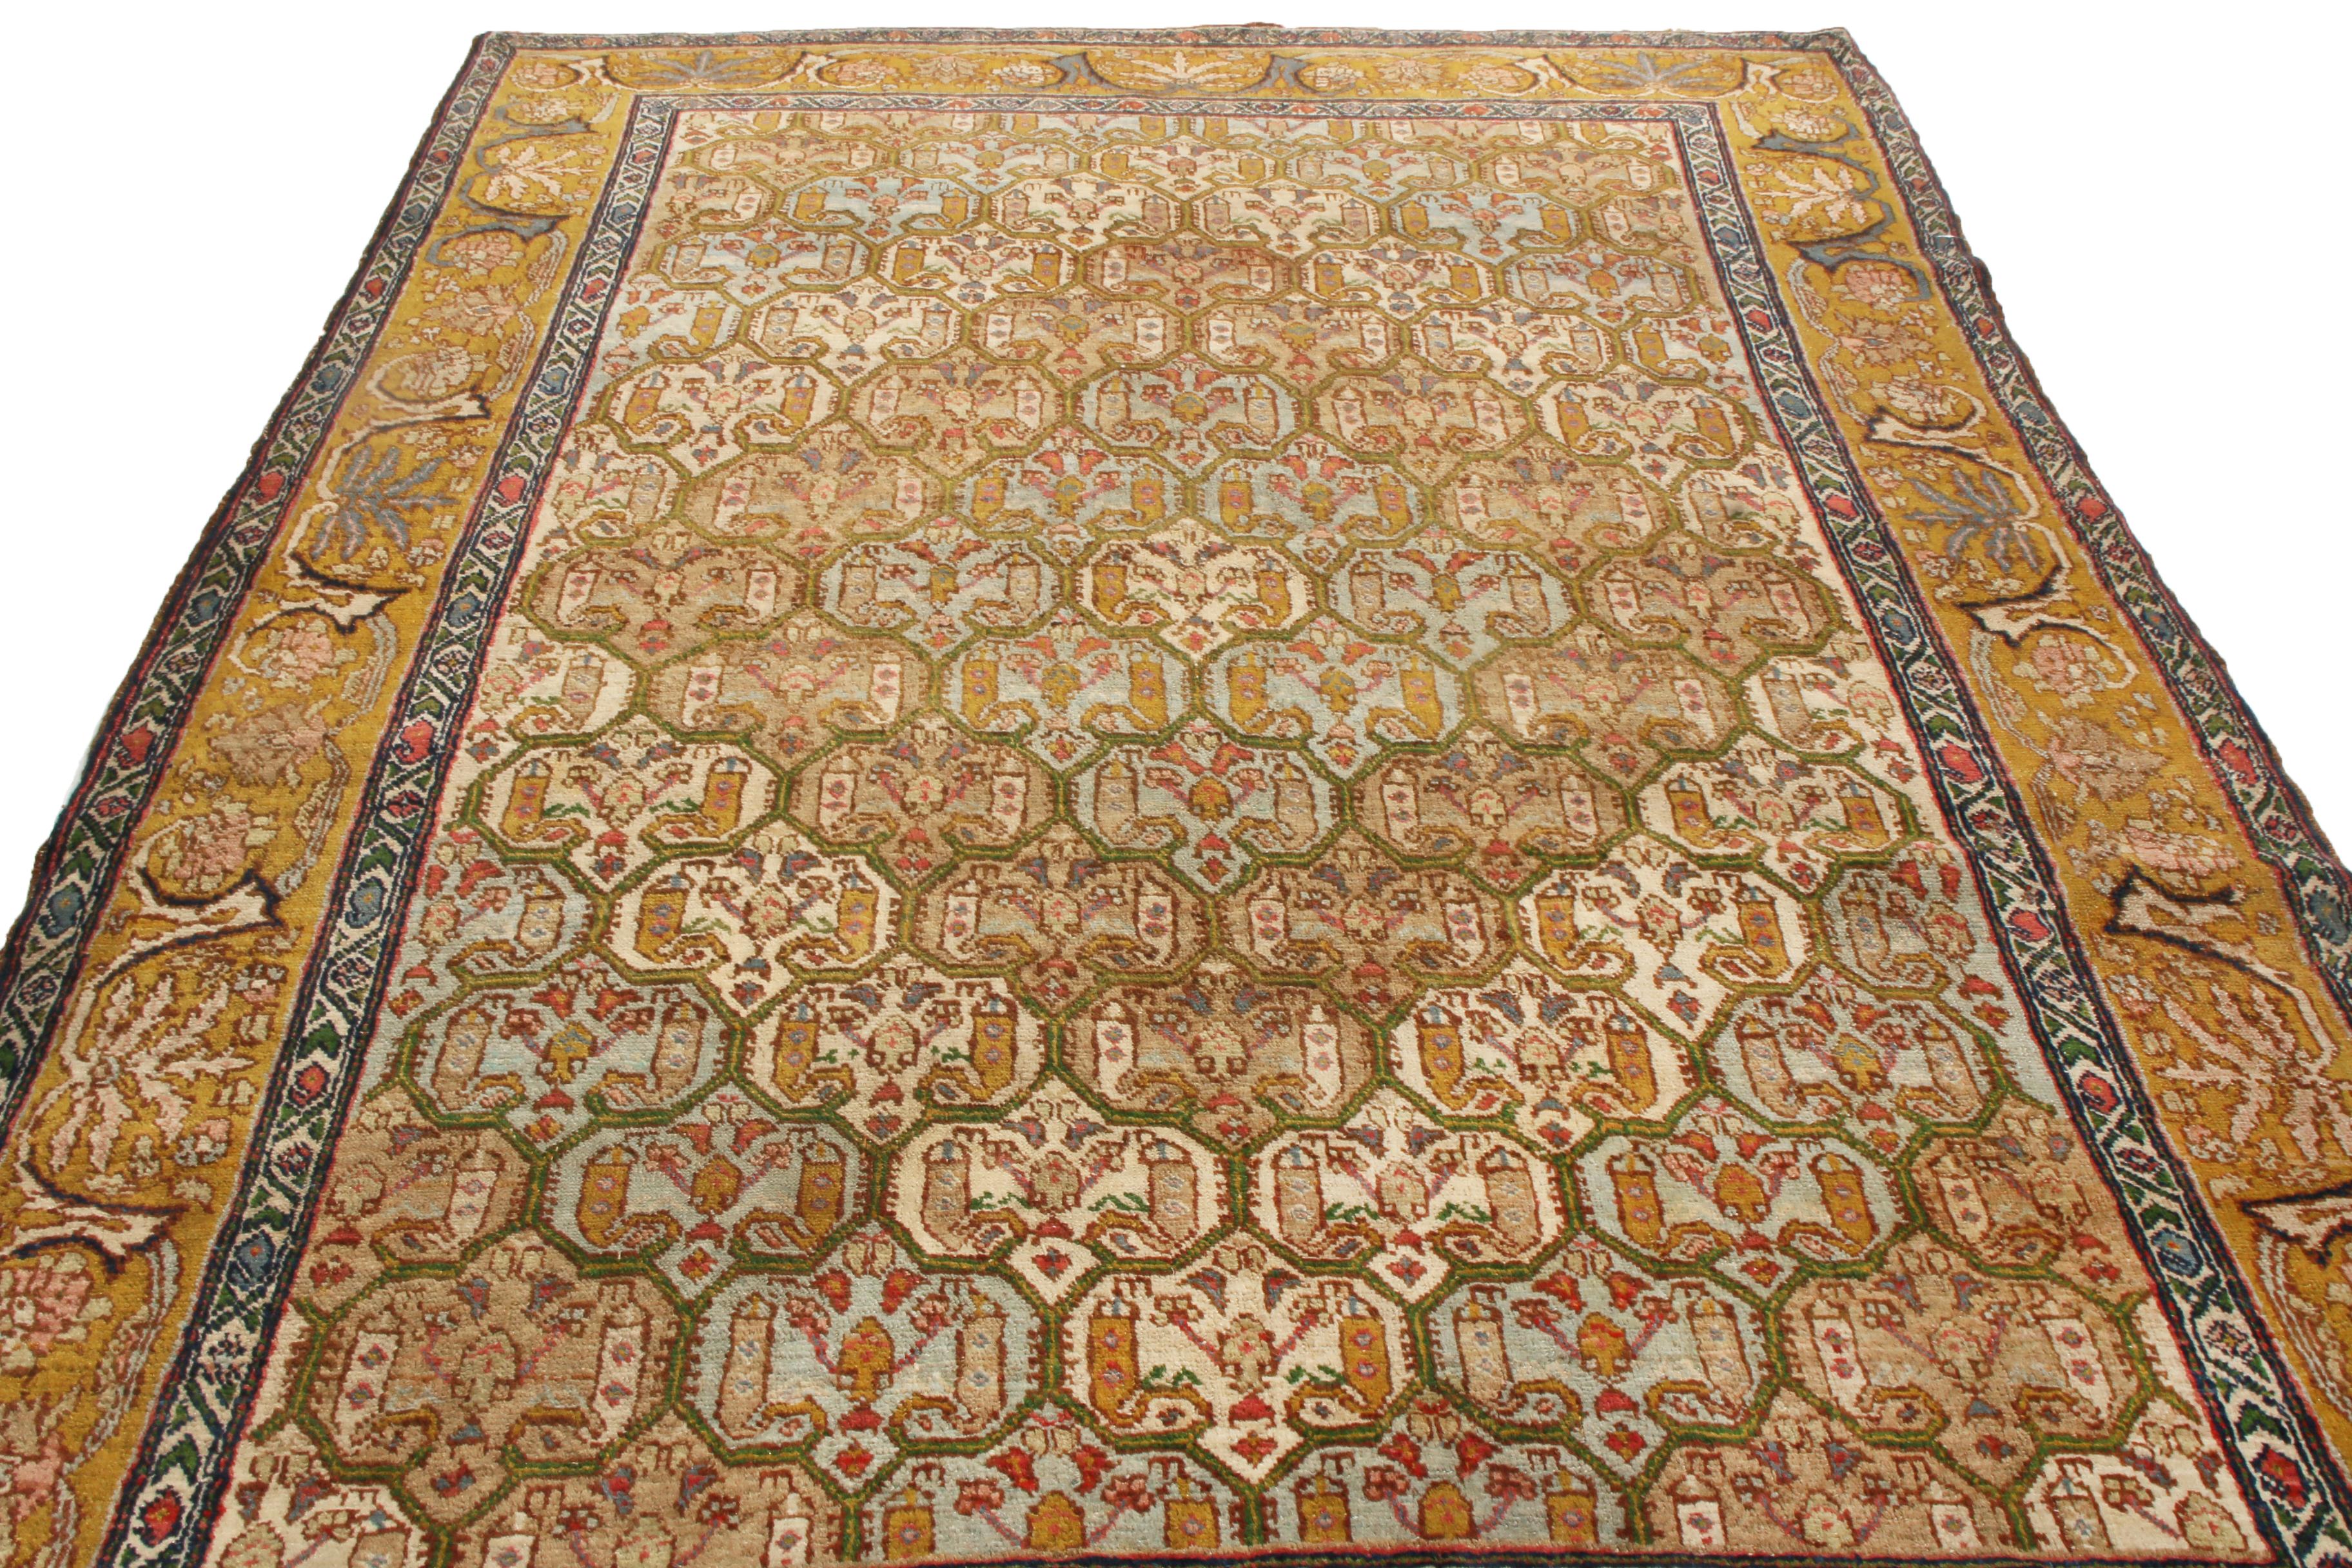 Hailing from 1890 with possible origins in Israel and Syria, this antique Jerusalem wool rug depicts a fine series of uncommon Boteh design patterns in unique, complementary colorways. Hand knotted in high quality wool, the rippling field design